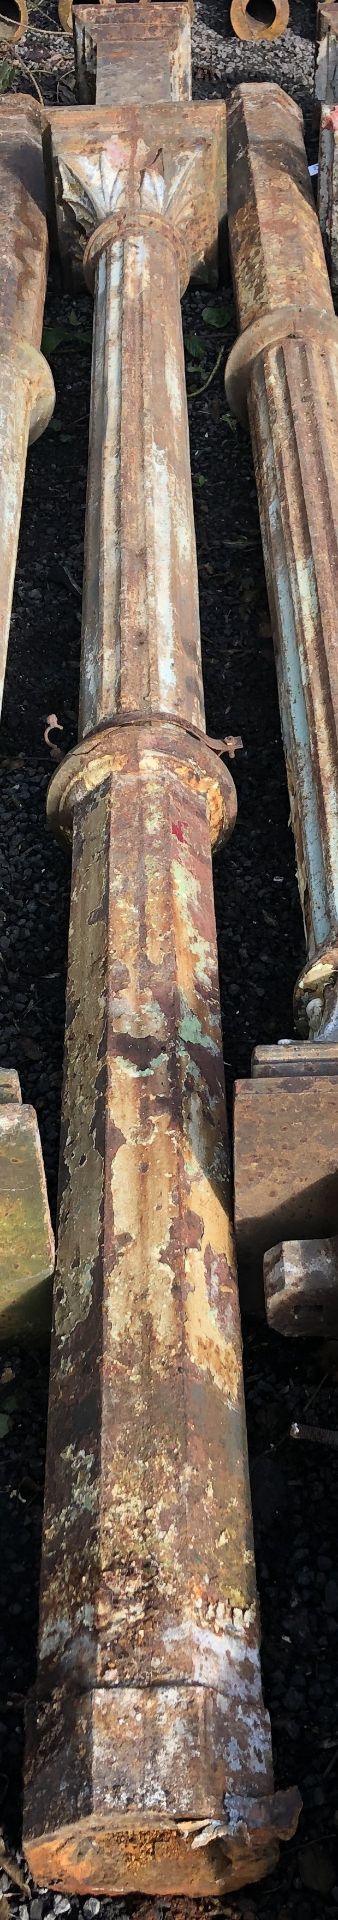 Cast iron Column from Listers Mill, Bradford, total length 4120mm, length of column feature